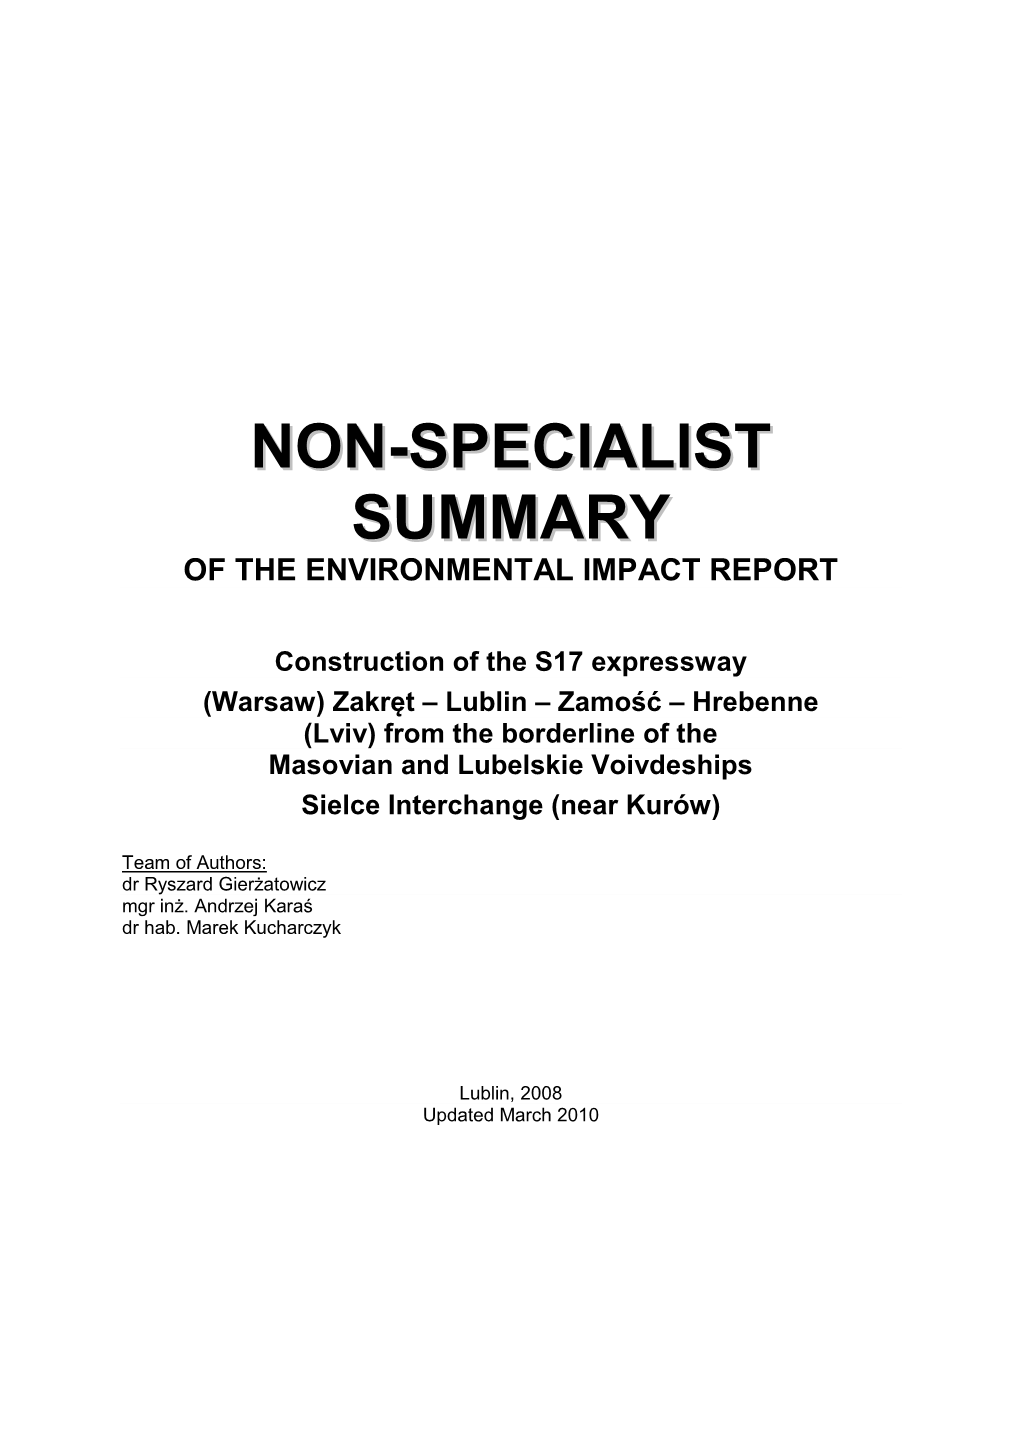 Non-Specialist Summary of the Environmental Impact Report